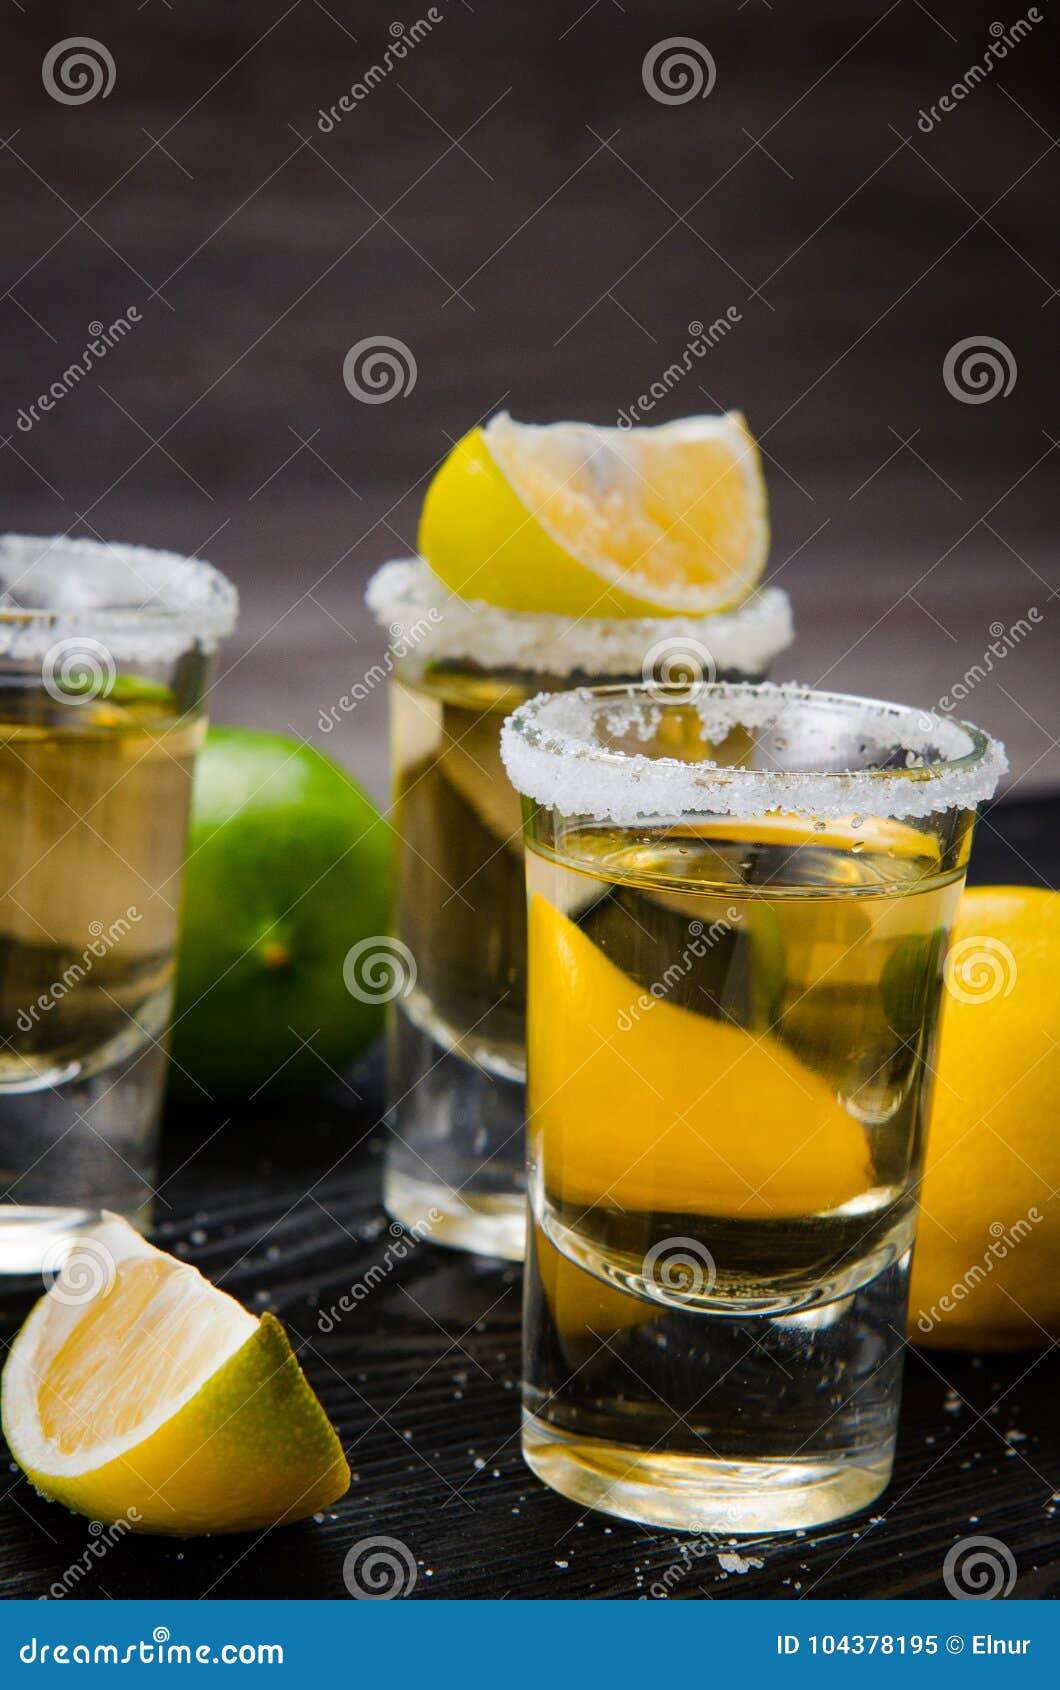 The Tequila Drink Served in Glasses with Lime and Salt Stock Image ...